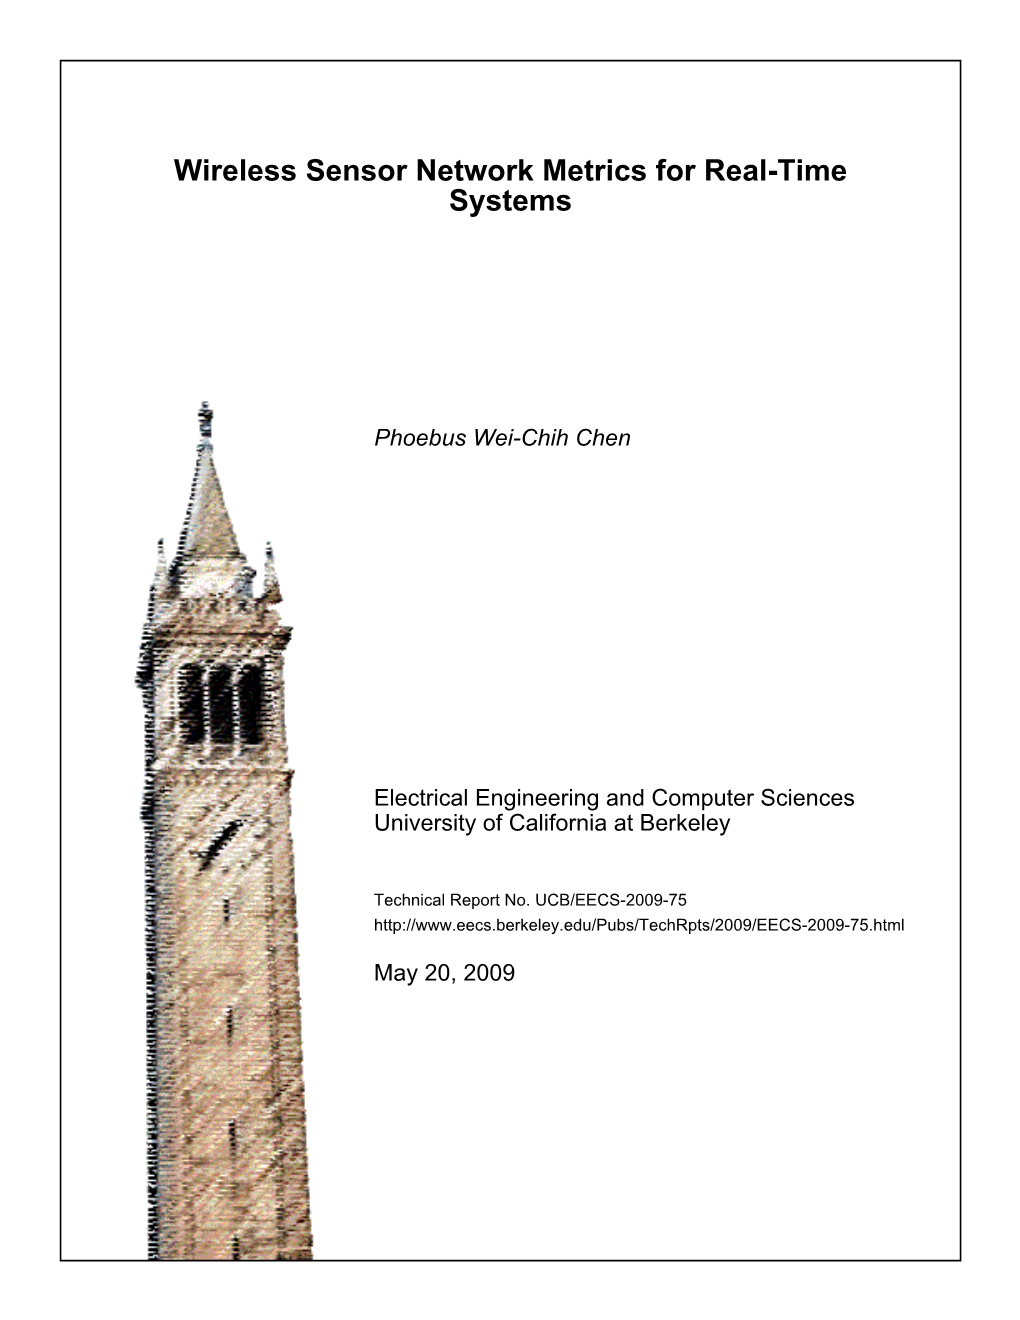 Wireless Sensor Network Metrics for Real-Time Systems